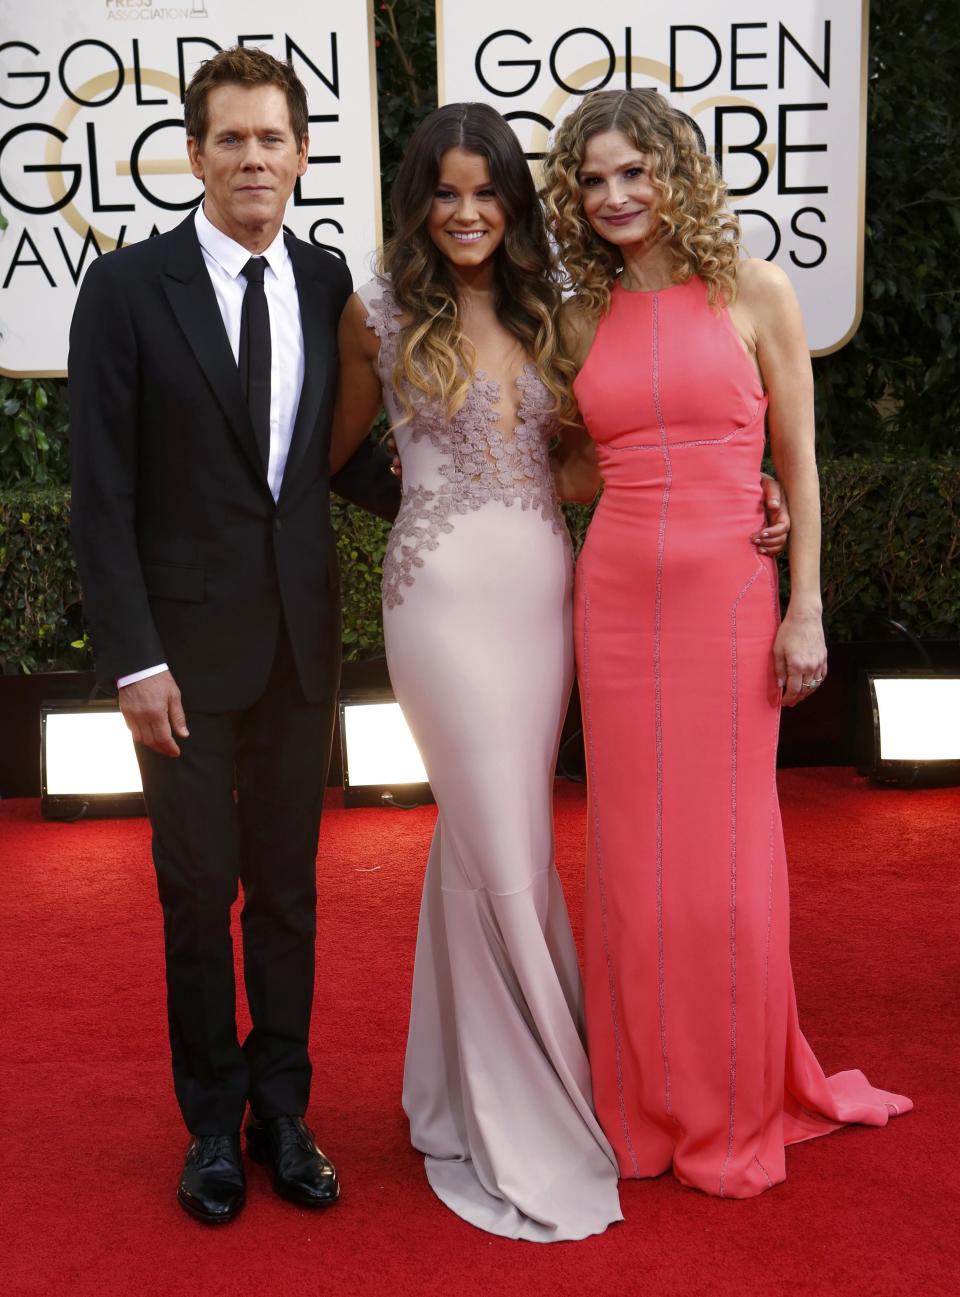 Actor Kevin Bacon with daughter Sosie Bacon and wife Kyra Sedgwick pose on arrival at the 71st annual Golden Globe Awards in Beverly Hills, California January 12, 2014. REUTERS/Mario Anzuoni (UNITED STATES - Tags: Entertainment)(GOLDENGLOBES-ARRIVALS)